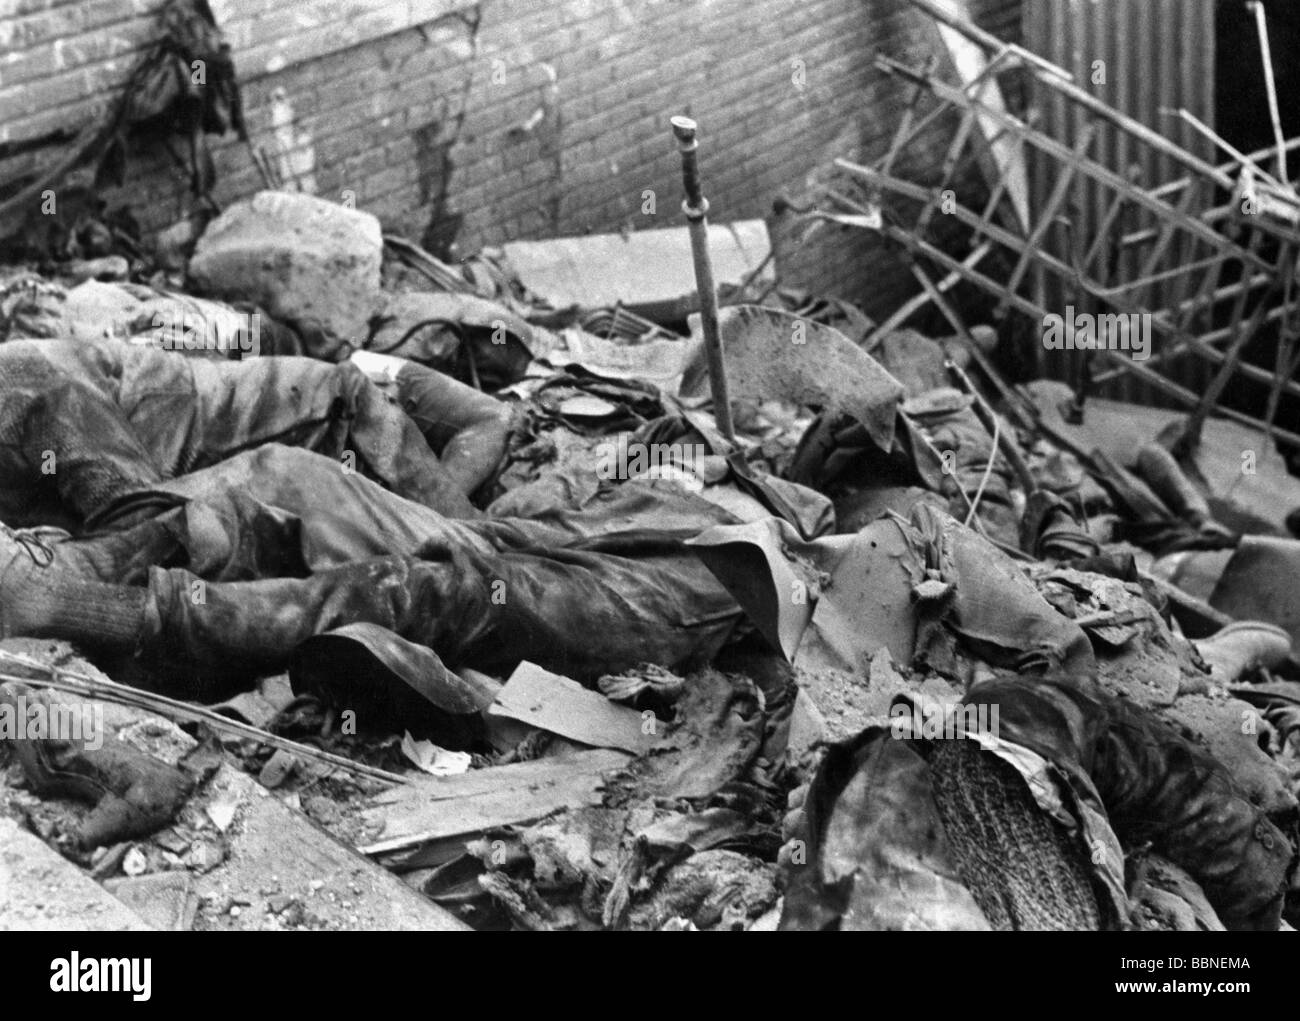 events, Second World War / WWII, aerial warfare, France 1942 / 1943, US air raid on Paris, 4.4.1943, debris and corpses at the metro station Pont de Sevres, 20th century, historic, historical, United States Army Air Force, USAAF, bombing attack, destruction, steps, entrance, dead bodies, victims, victim, death, underground, people, 1940s, Stock Photo